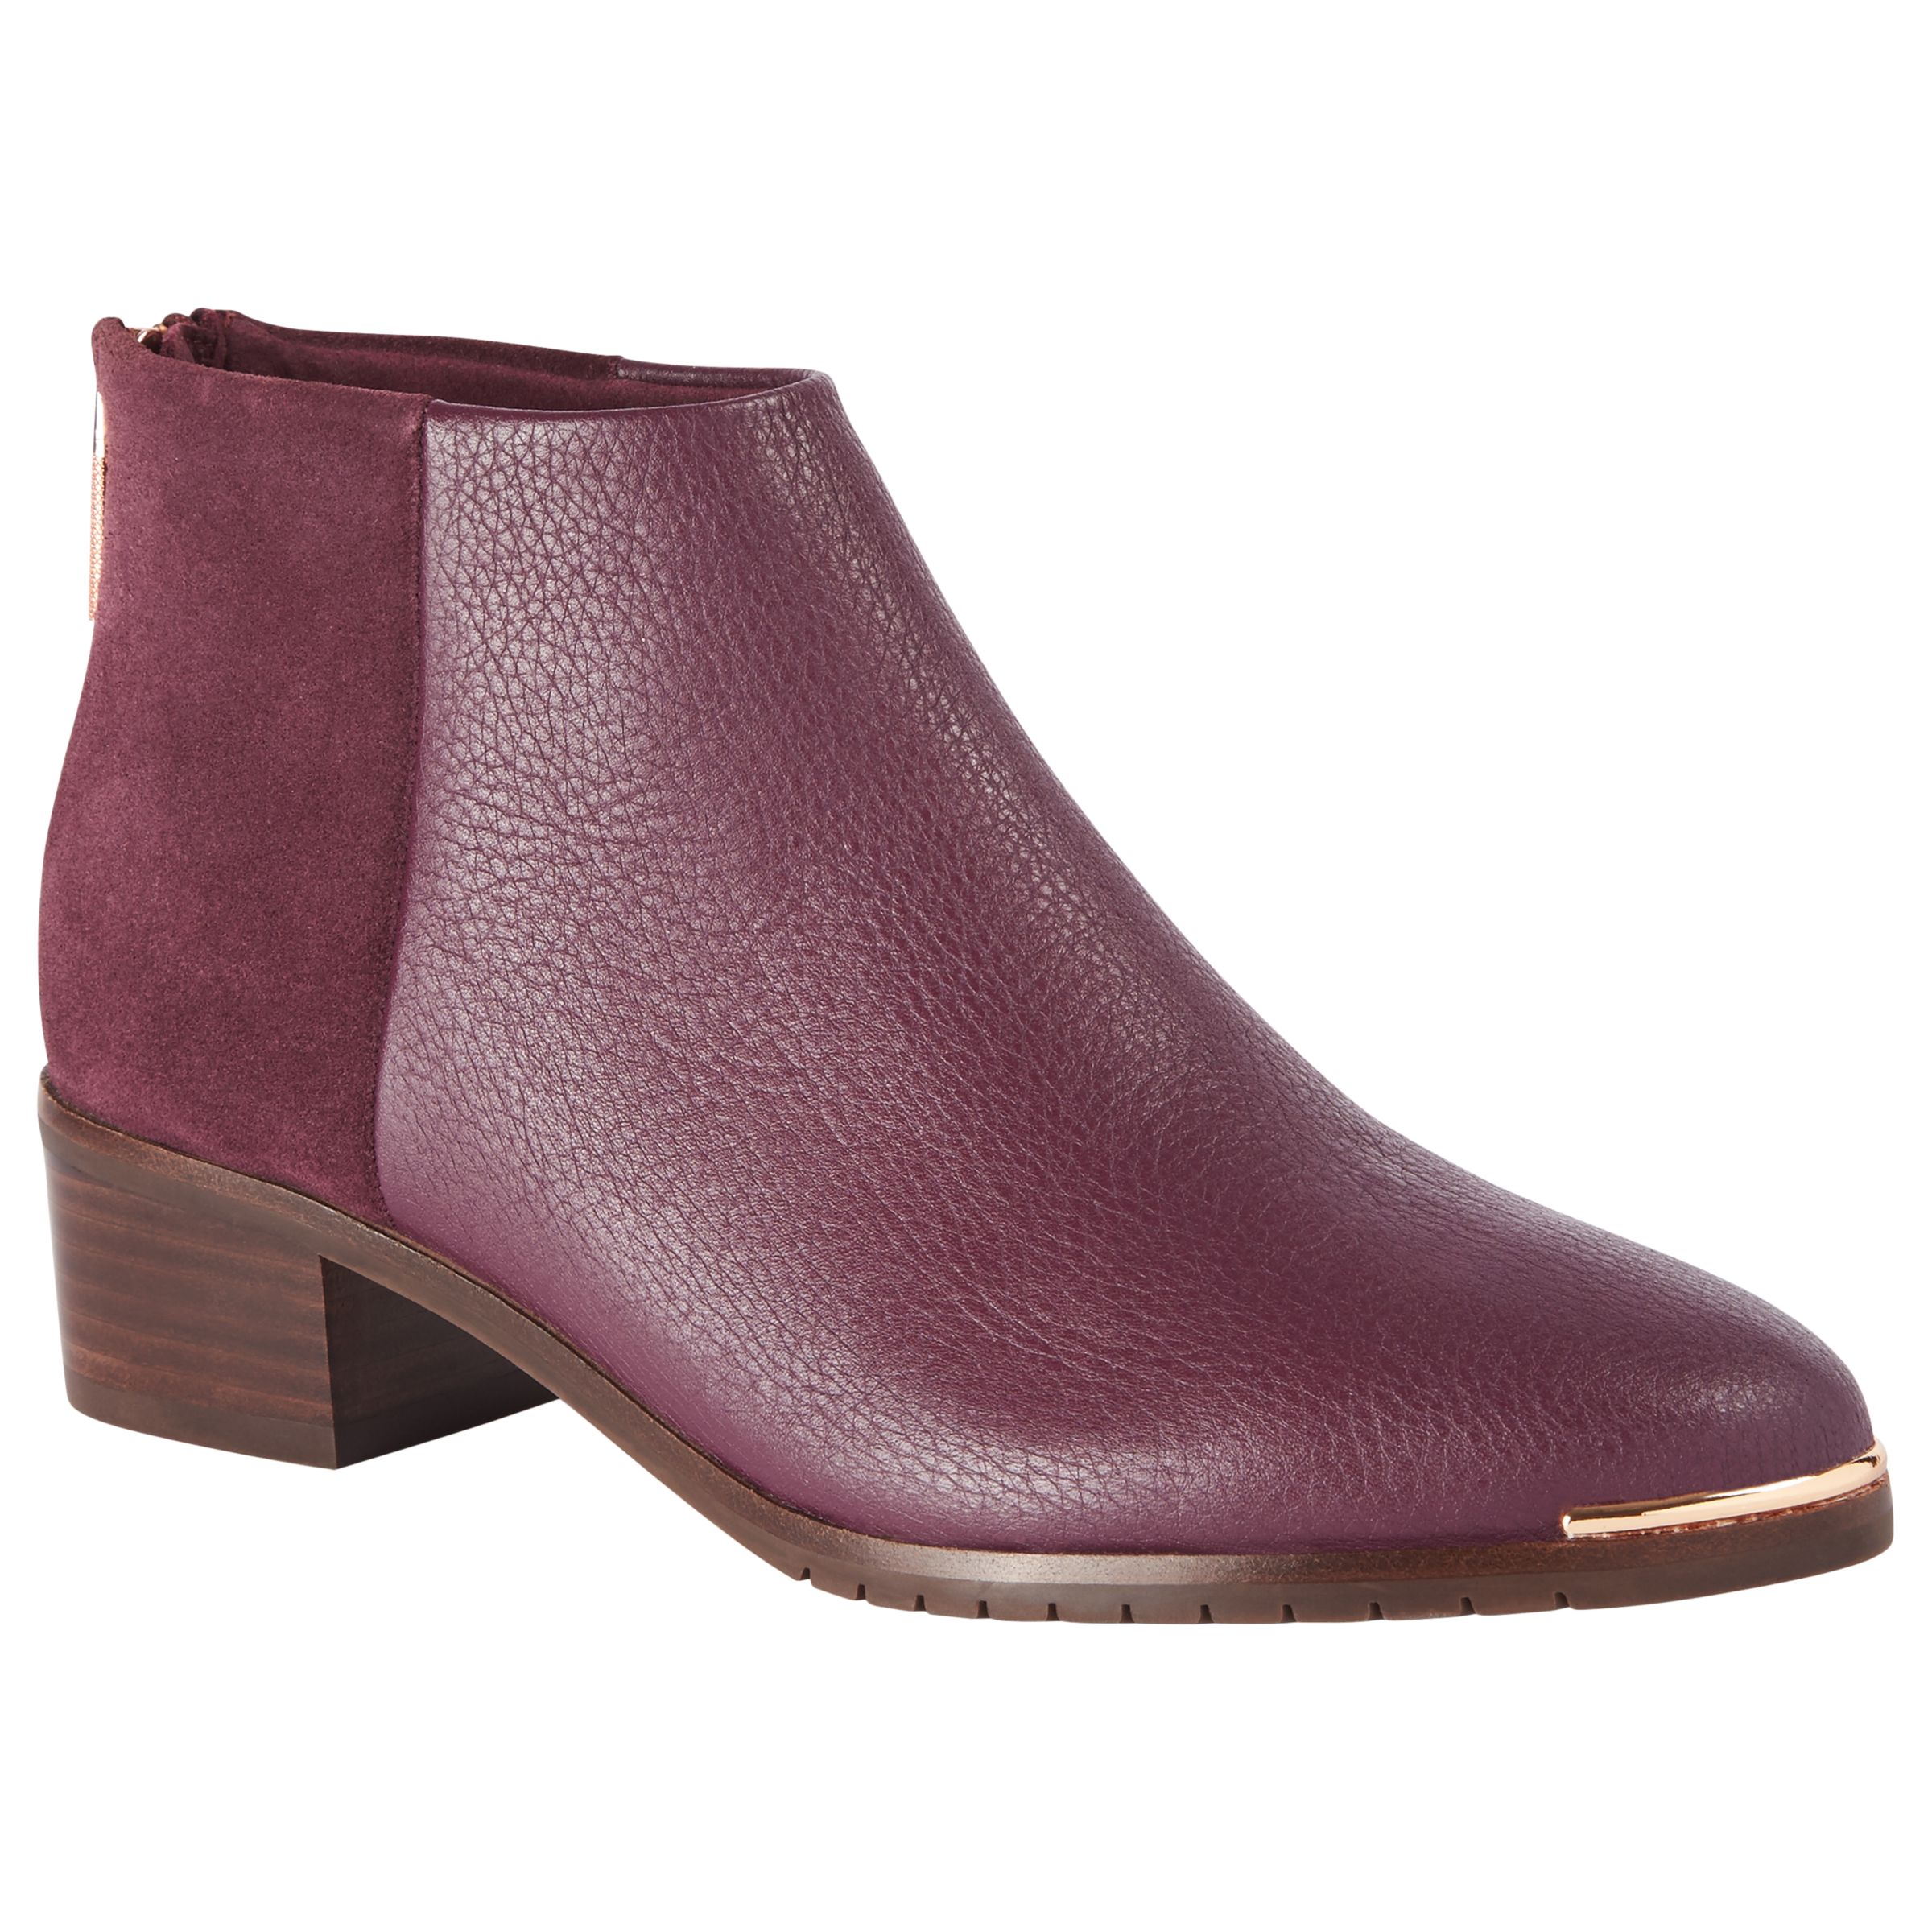 Ted Baker Sasybell Faux Fur Lined Block Heel Ankle Boots, Burgundy, 5